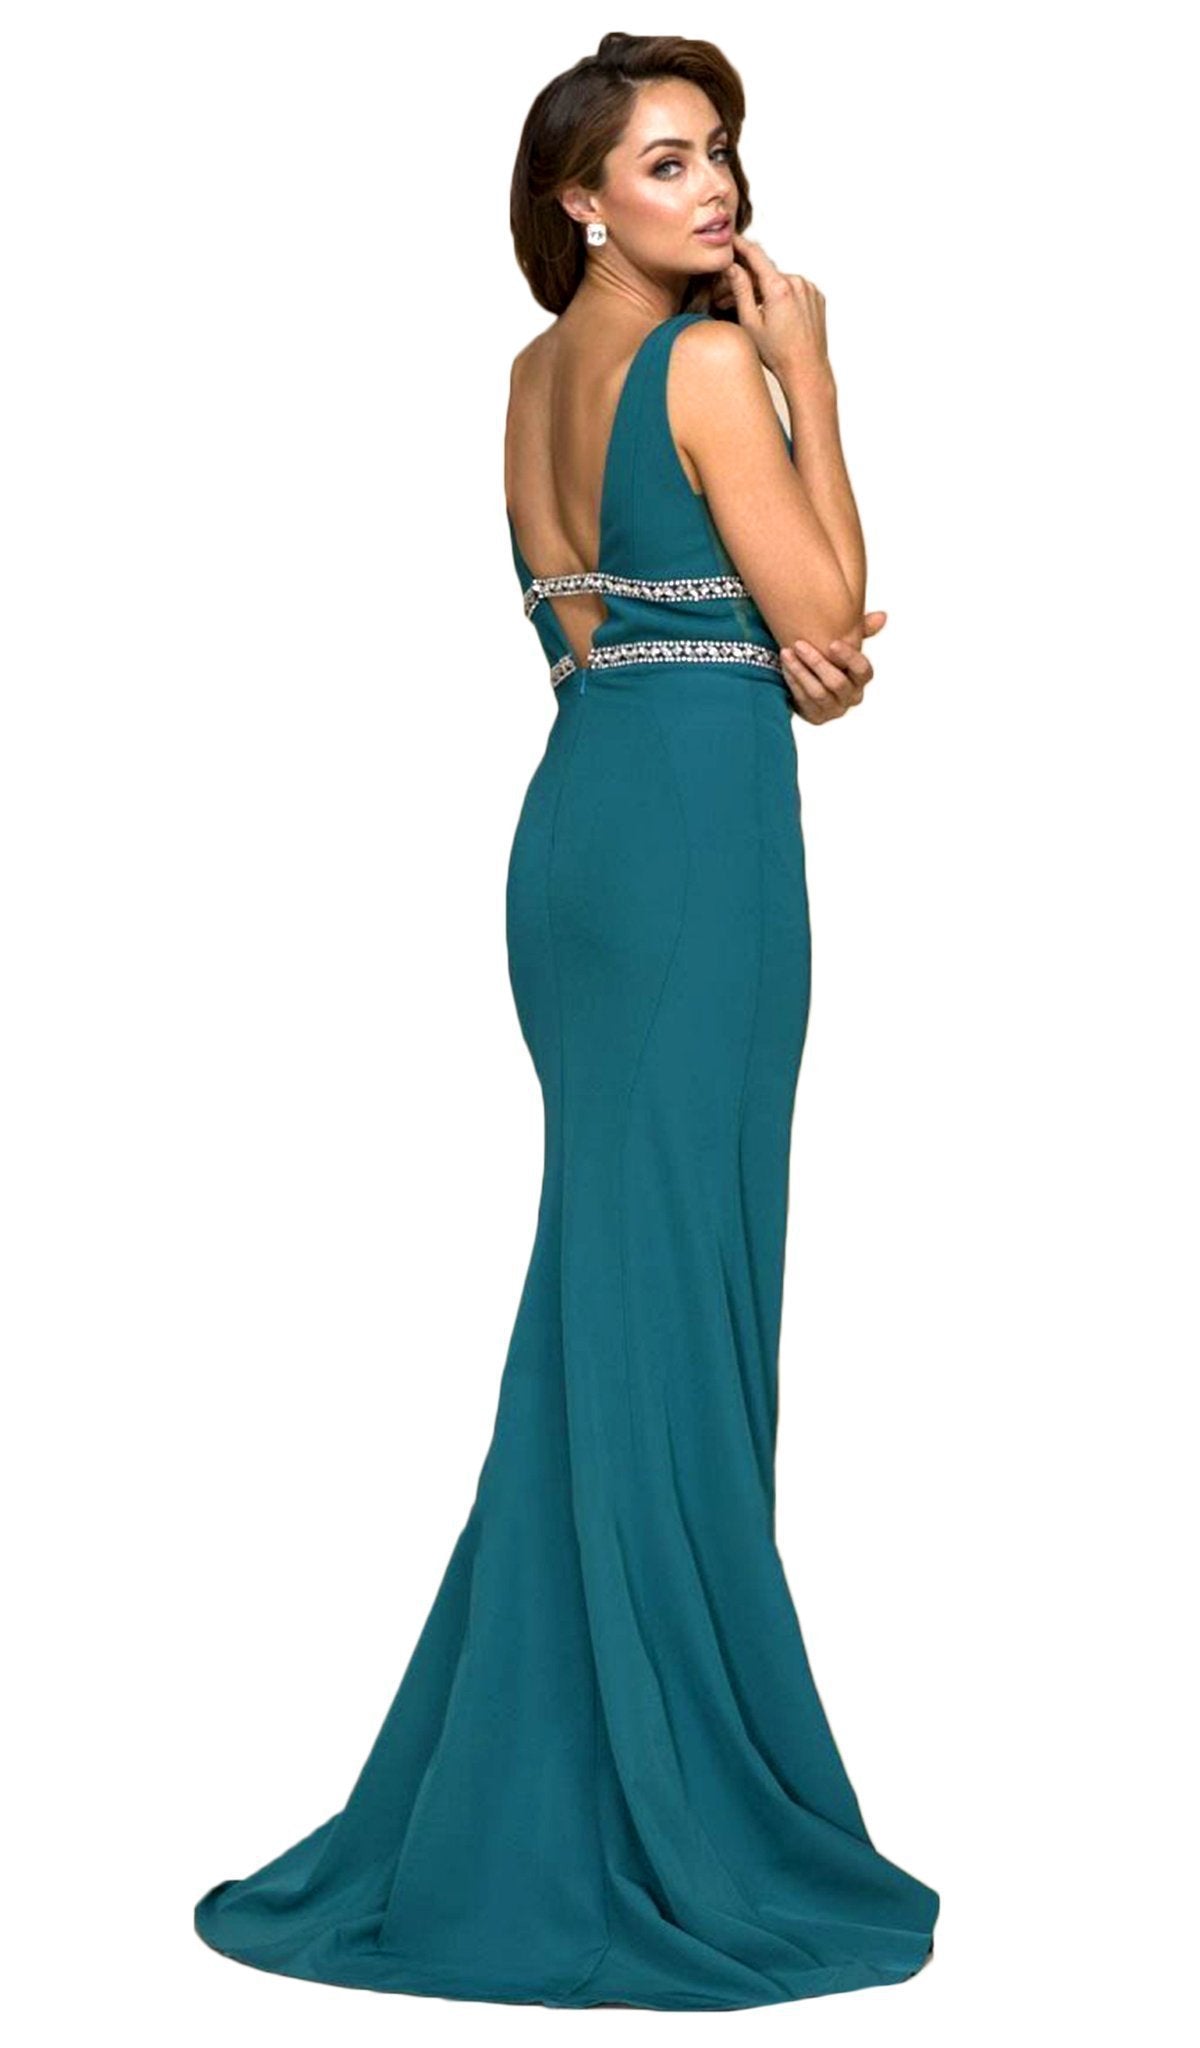 Nox Anabel - A076 Sleeveless Jewel-Banded V-Neck Mermaid Gown Special Occasion Dress